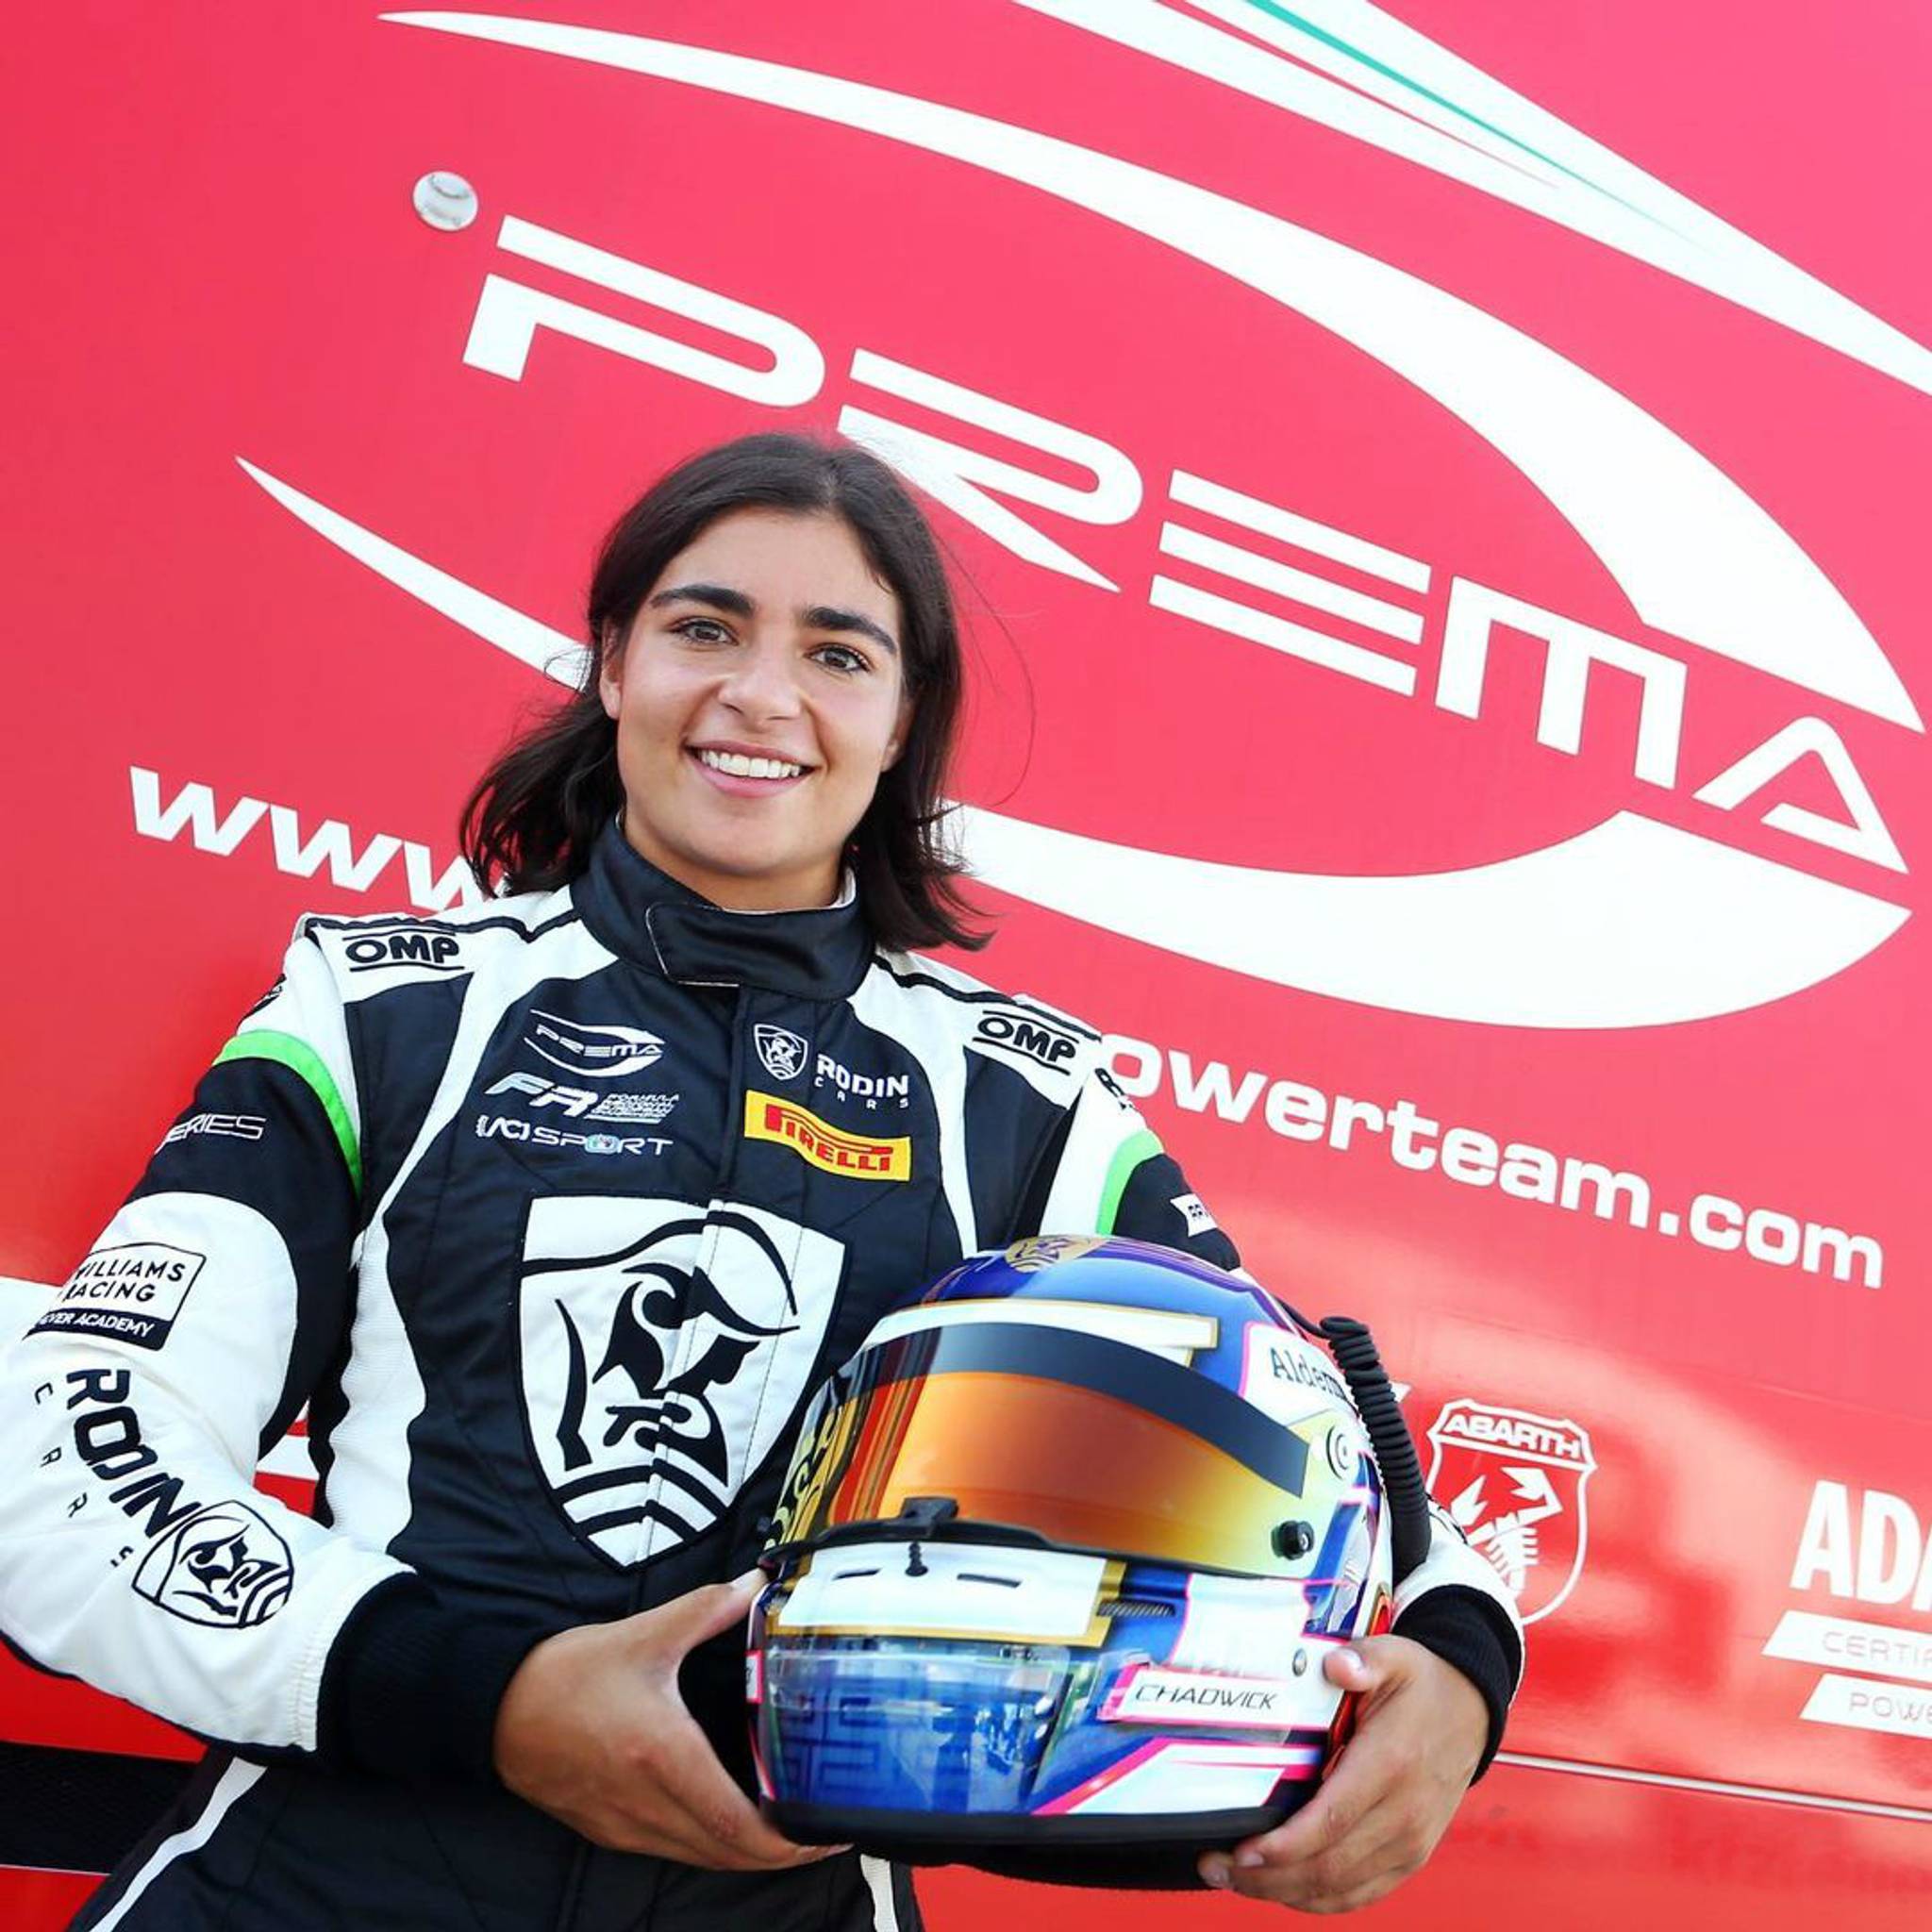 W series x Formula 1 is a beacon for women’s racing